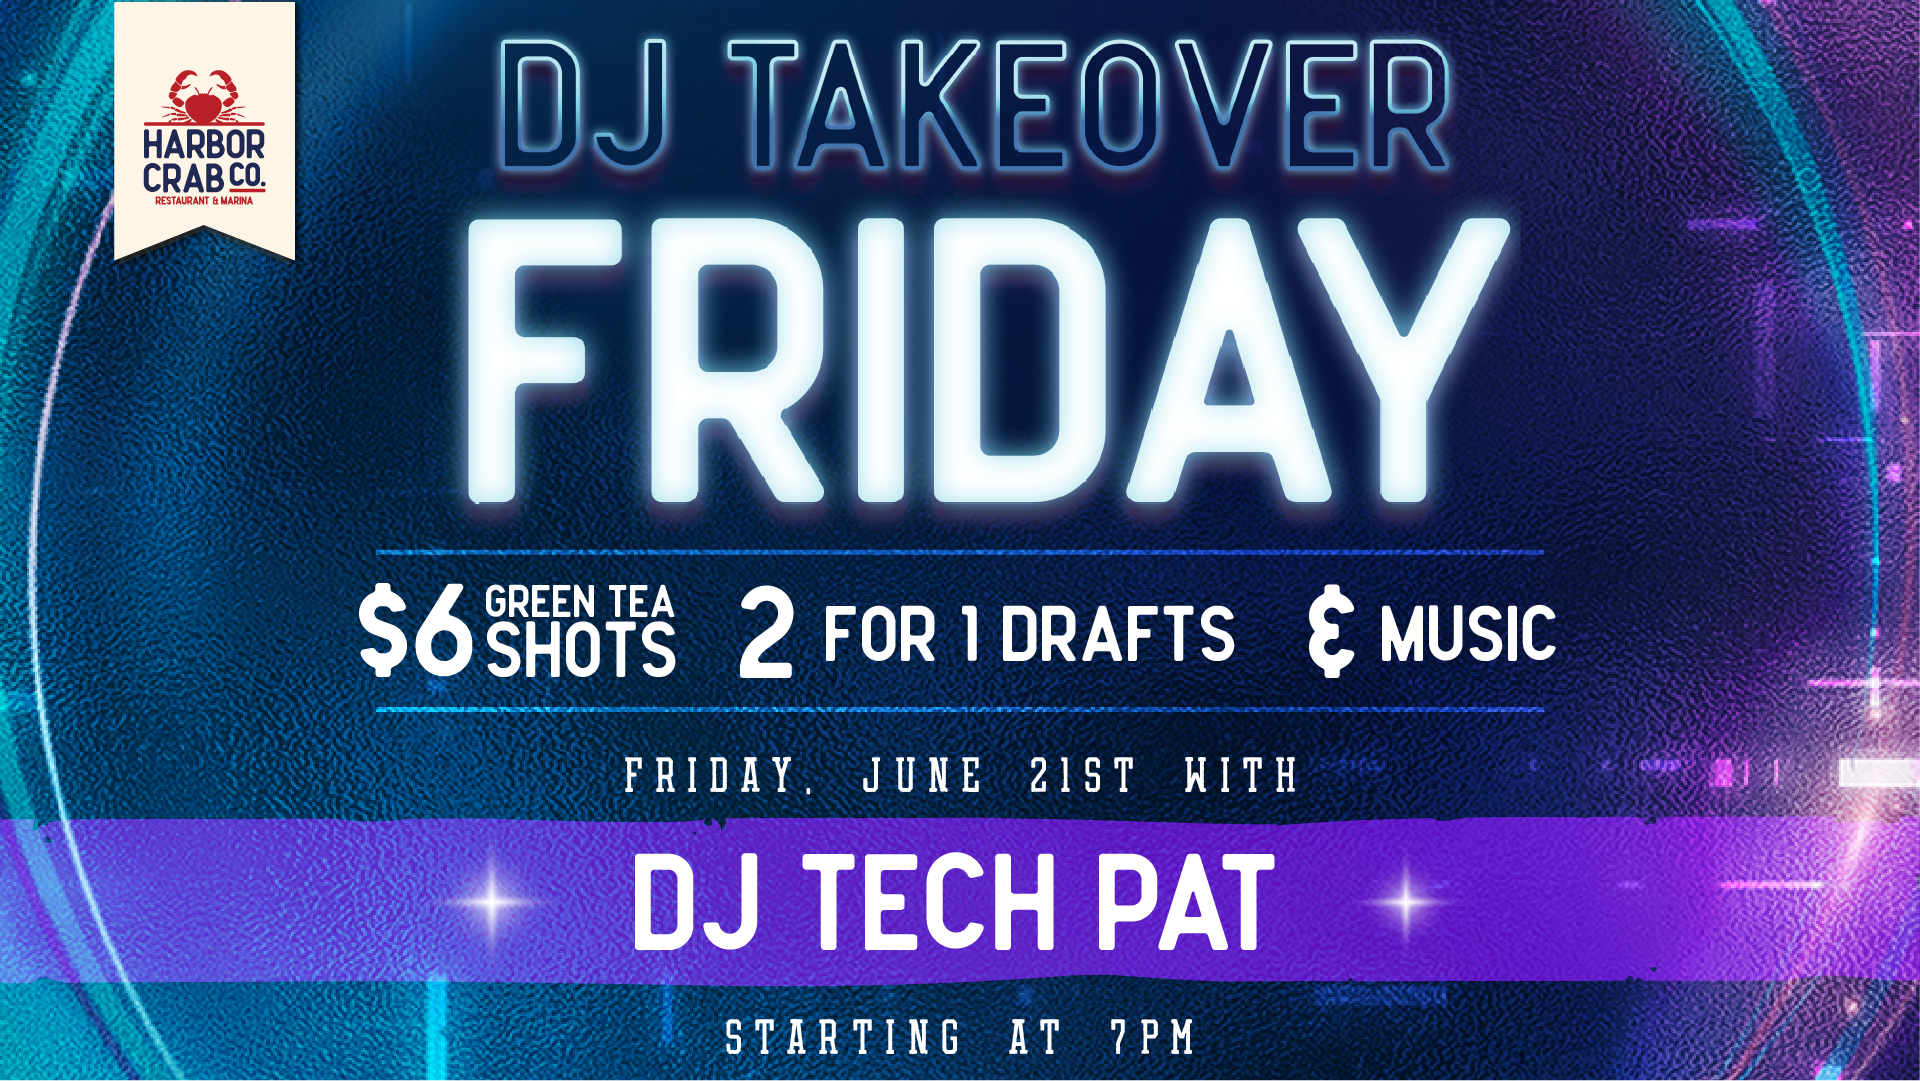 DJ Tech Pat live at Harbor Crab on June 21st at 7pm with $6 green tea shots and 2-for-1 drafts.